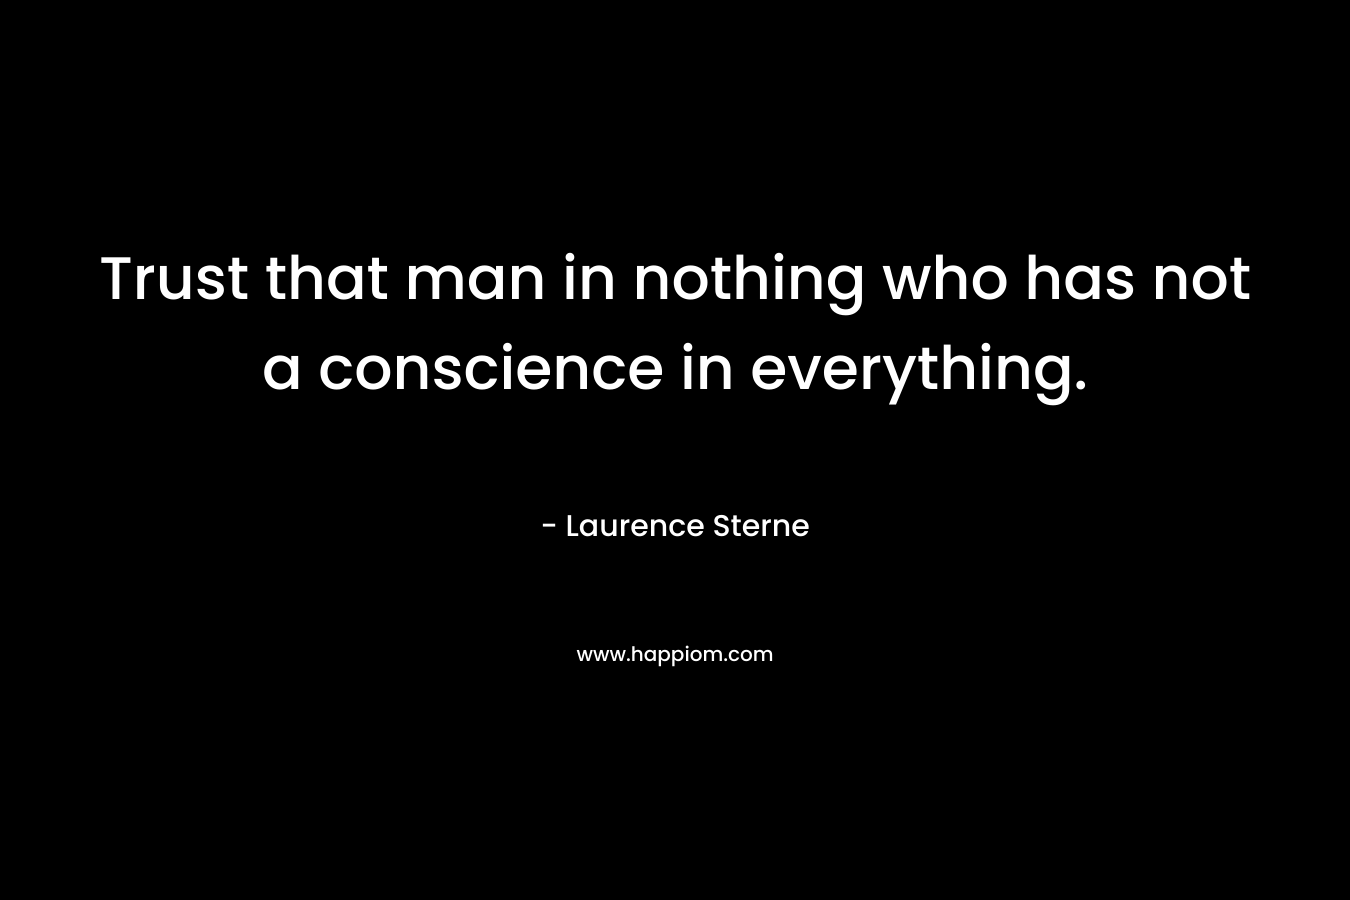 Trust that man in nothing who has not a conscience in everything.